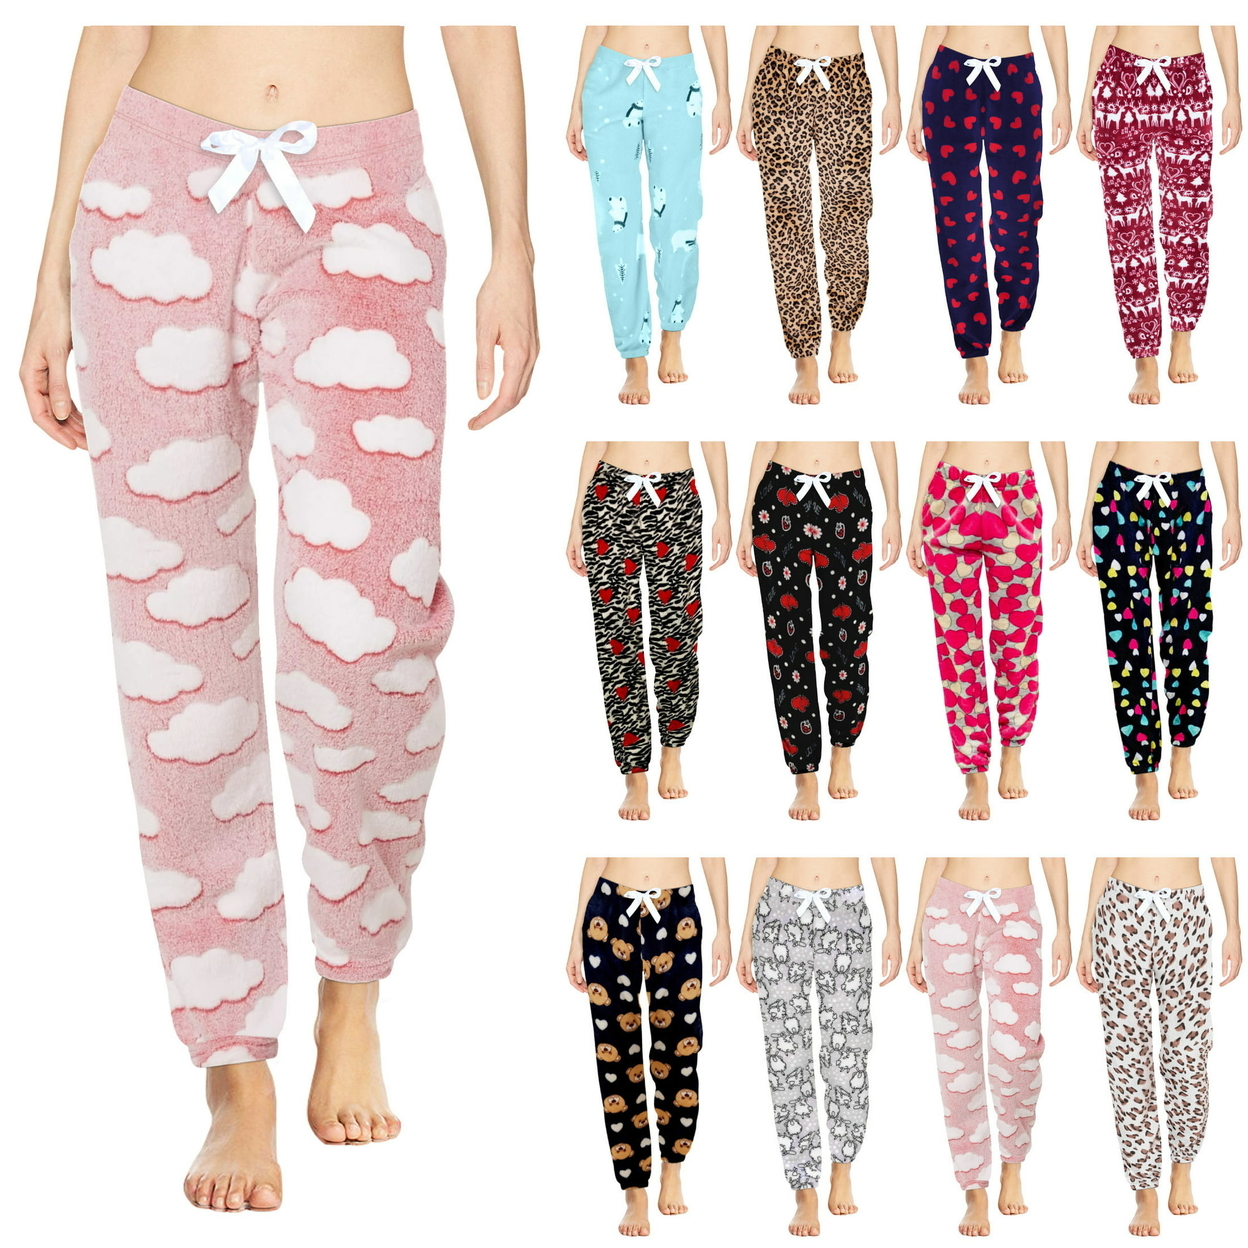 3-Pack: Women's Solid & Printed Ultra-Soft Comfy Stretch Micro-Fleece Pajama Lounge Pants - X-large, Animal